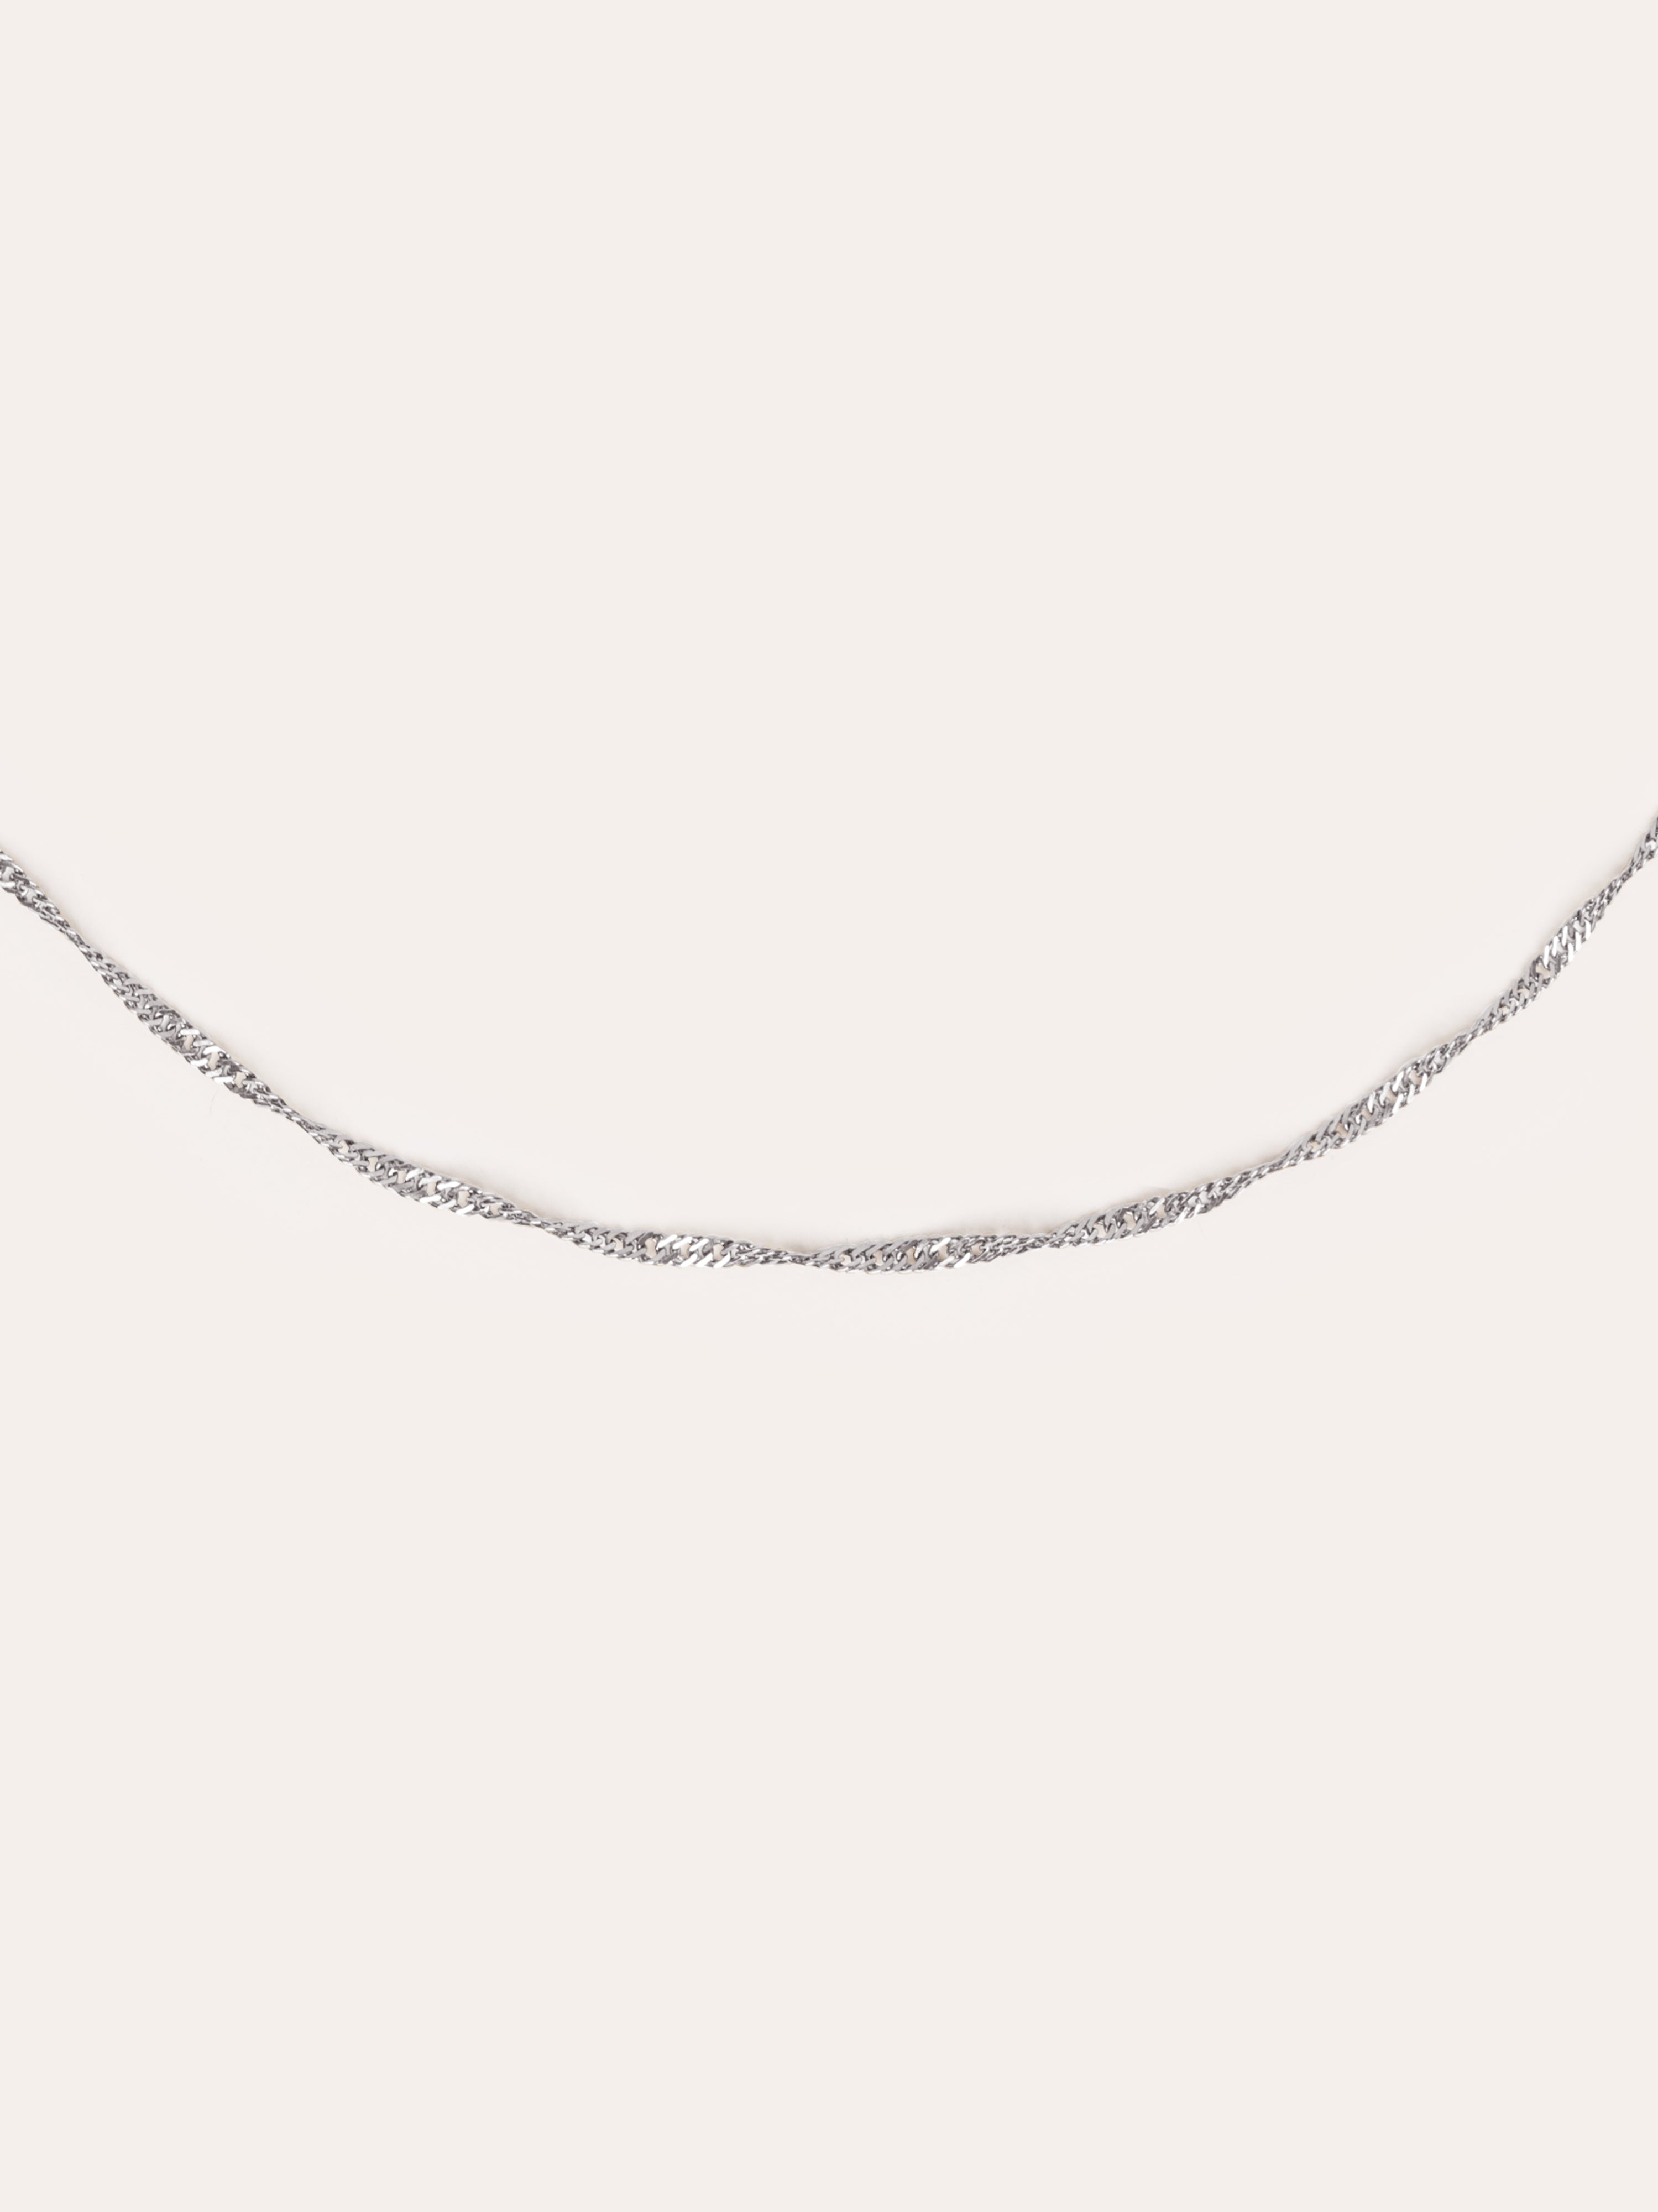 Mini Twist Stainless Steel Necklace